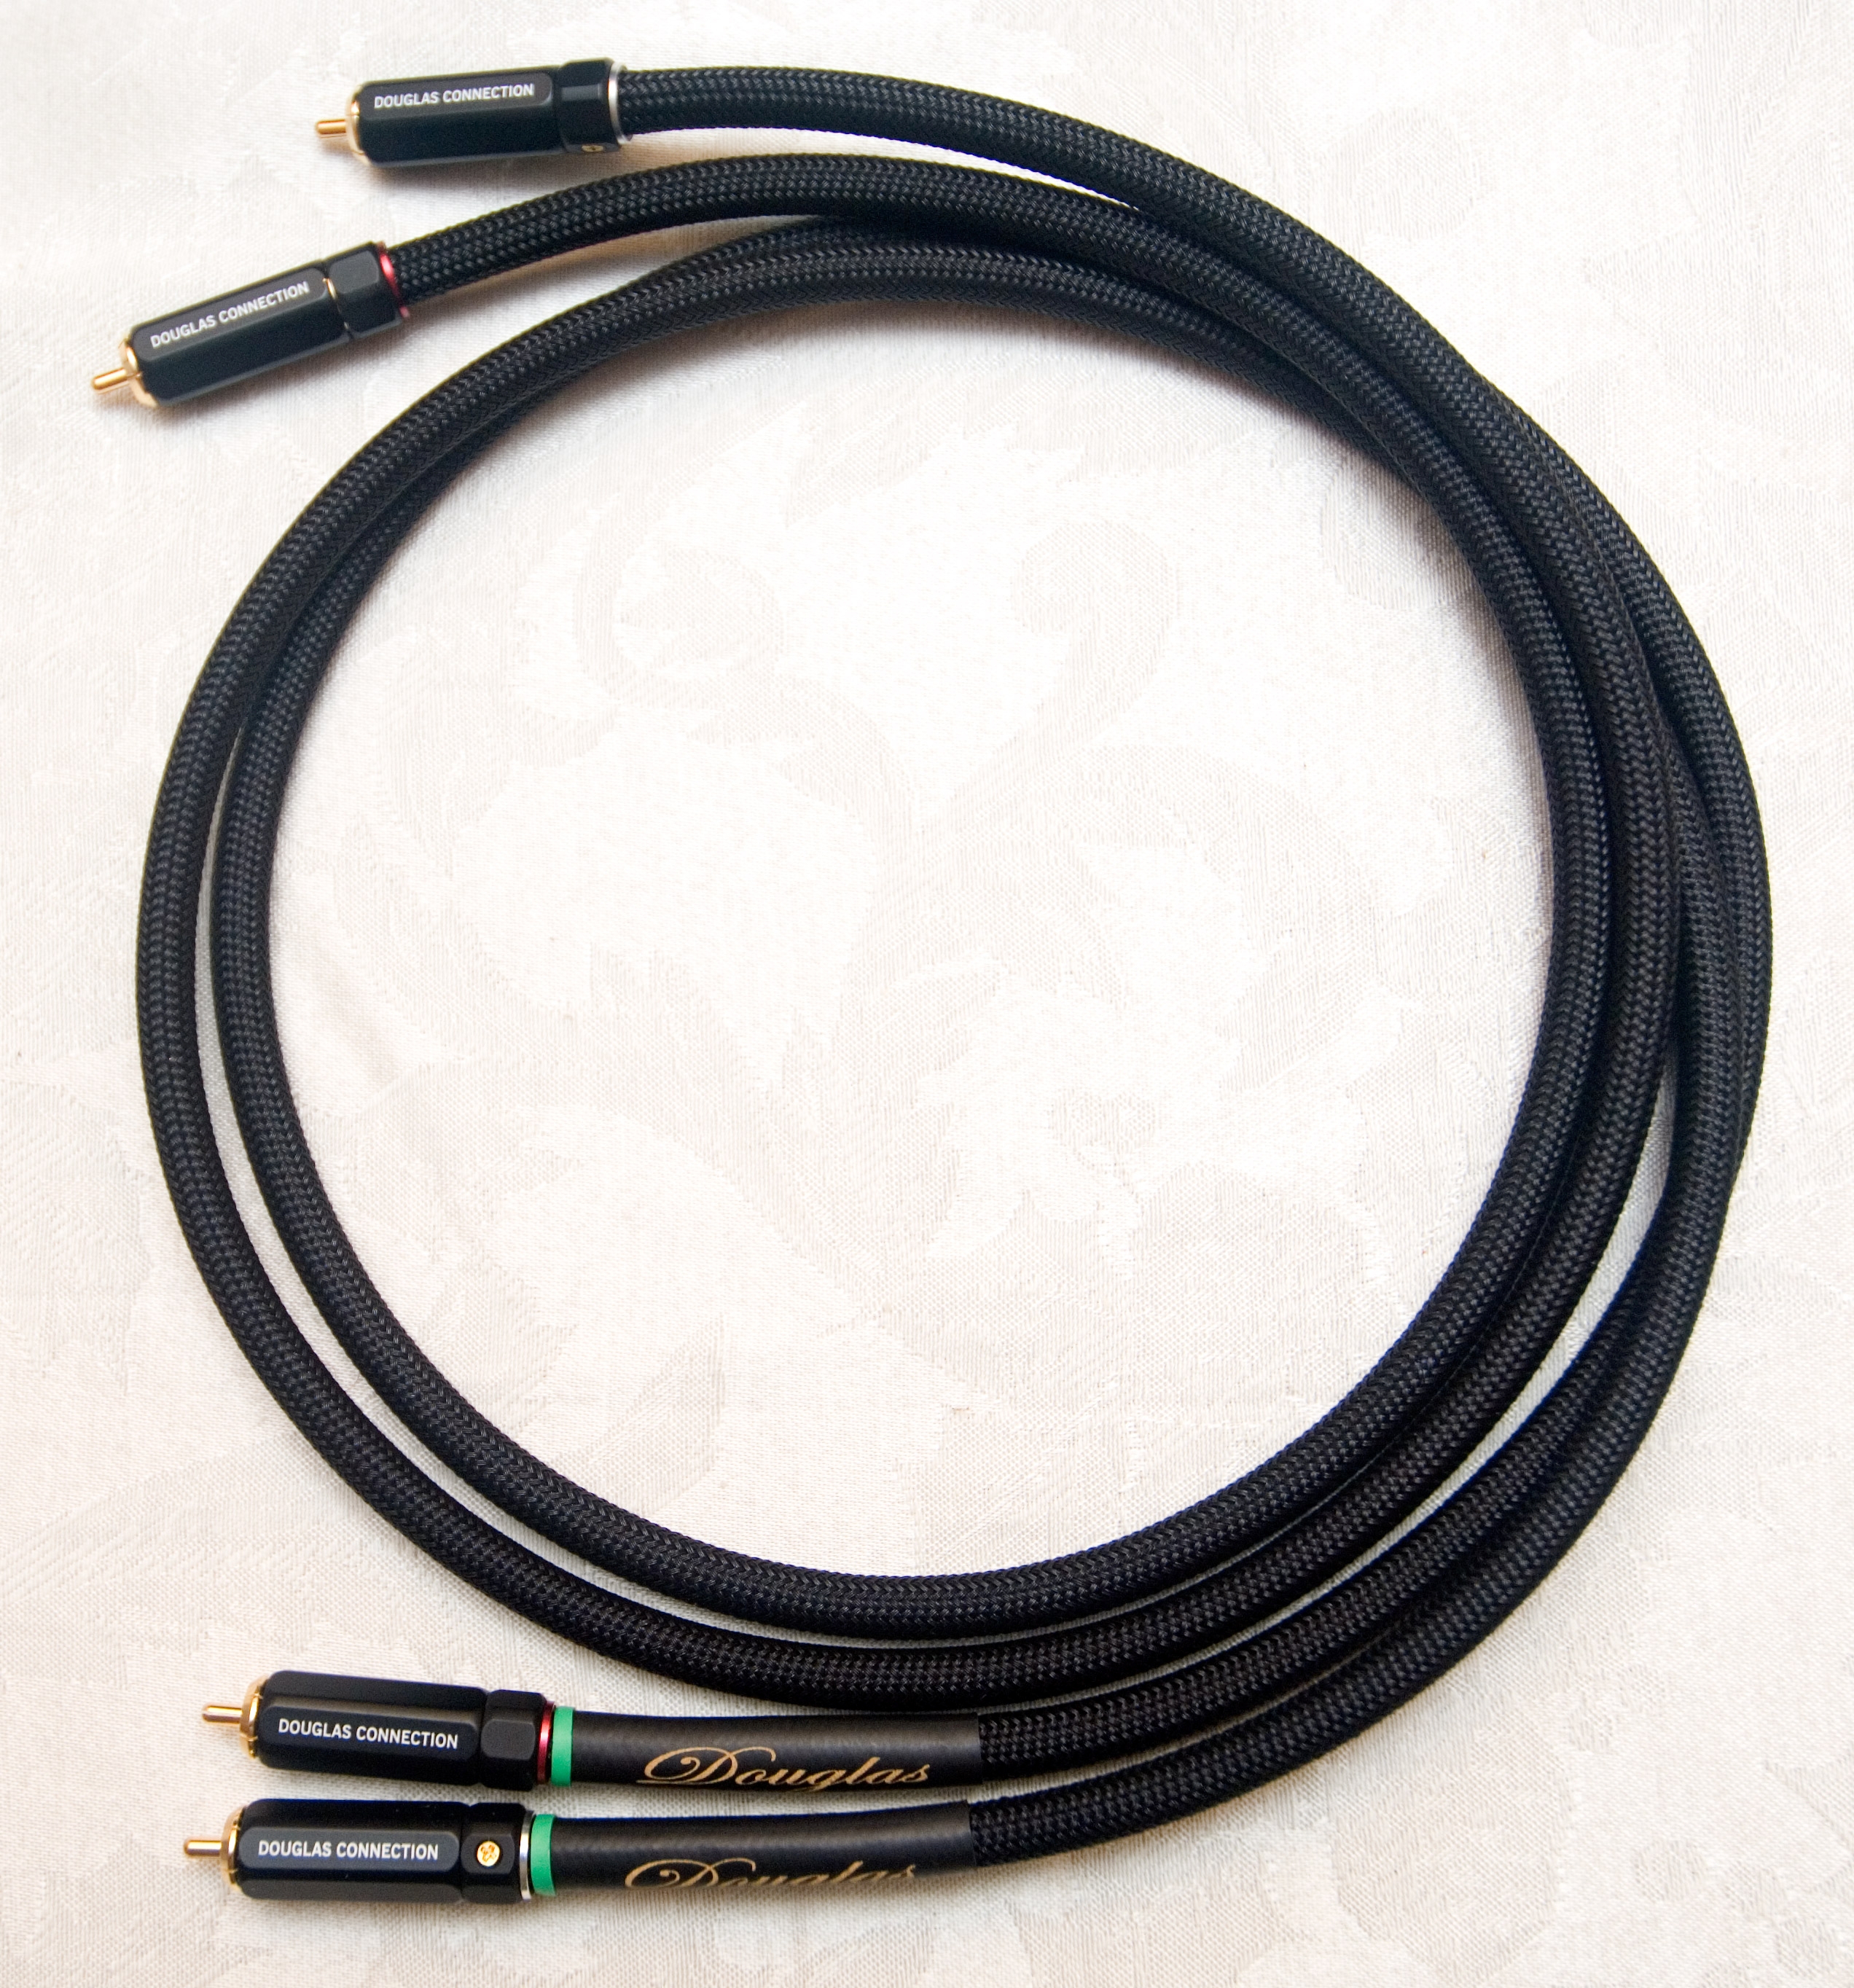 Bravo OFC DIY Interconnect cable Kit